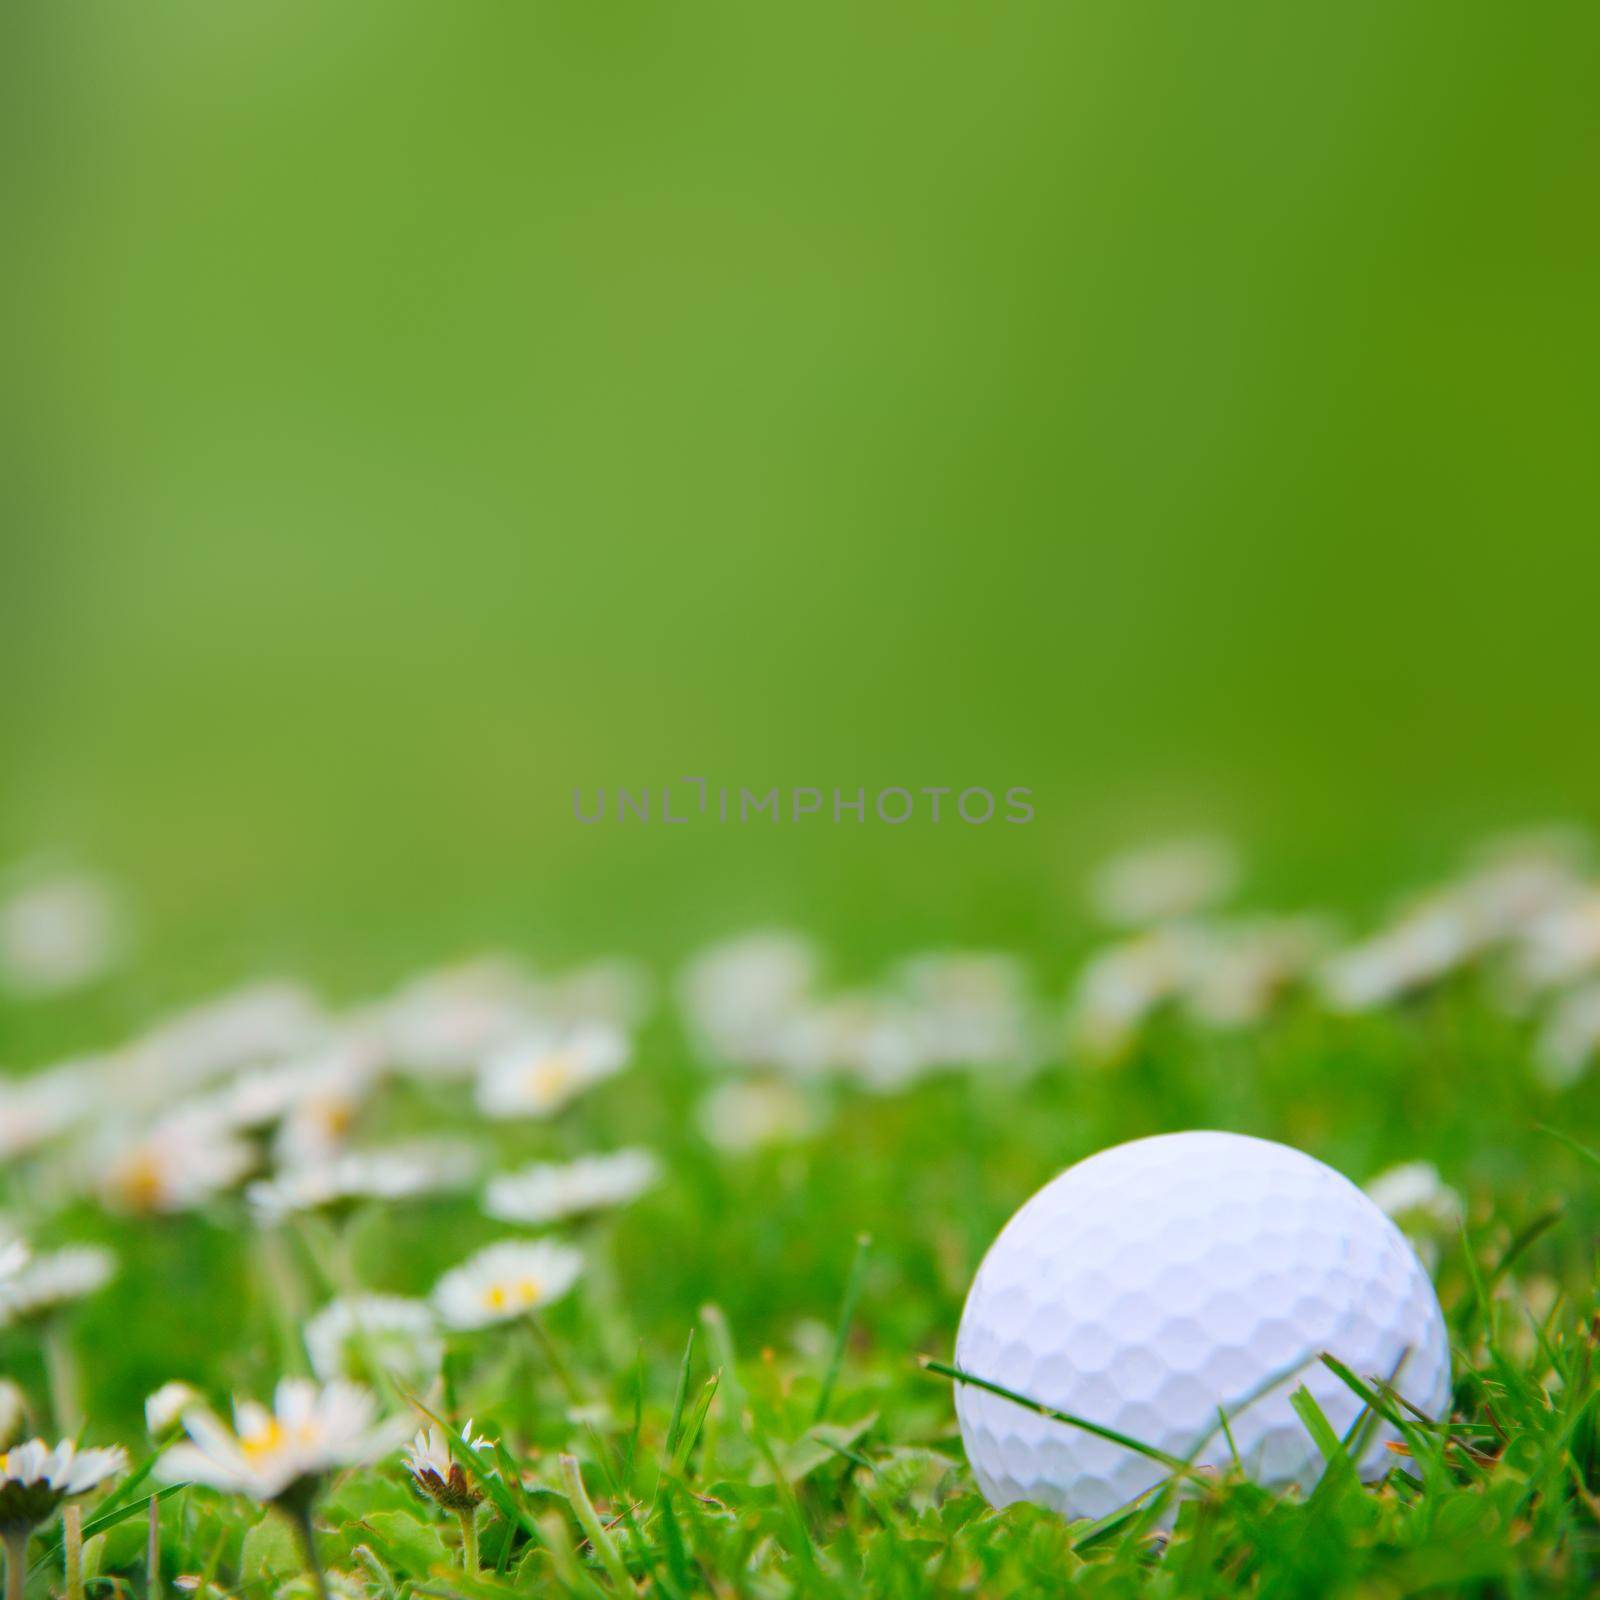 Golf ball on green grass of course close-up view